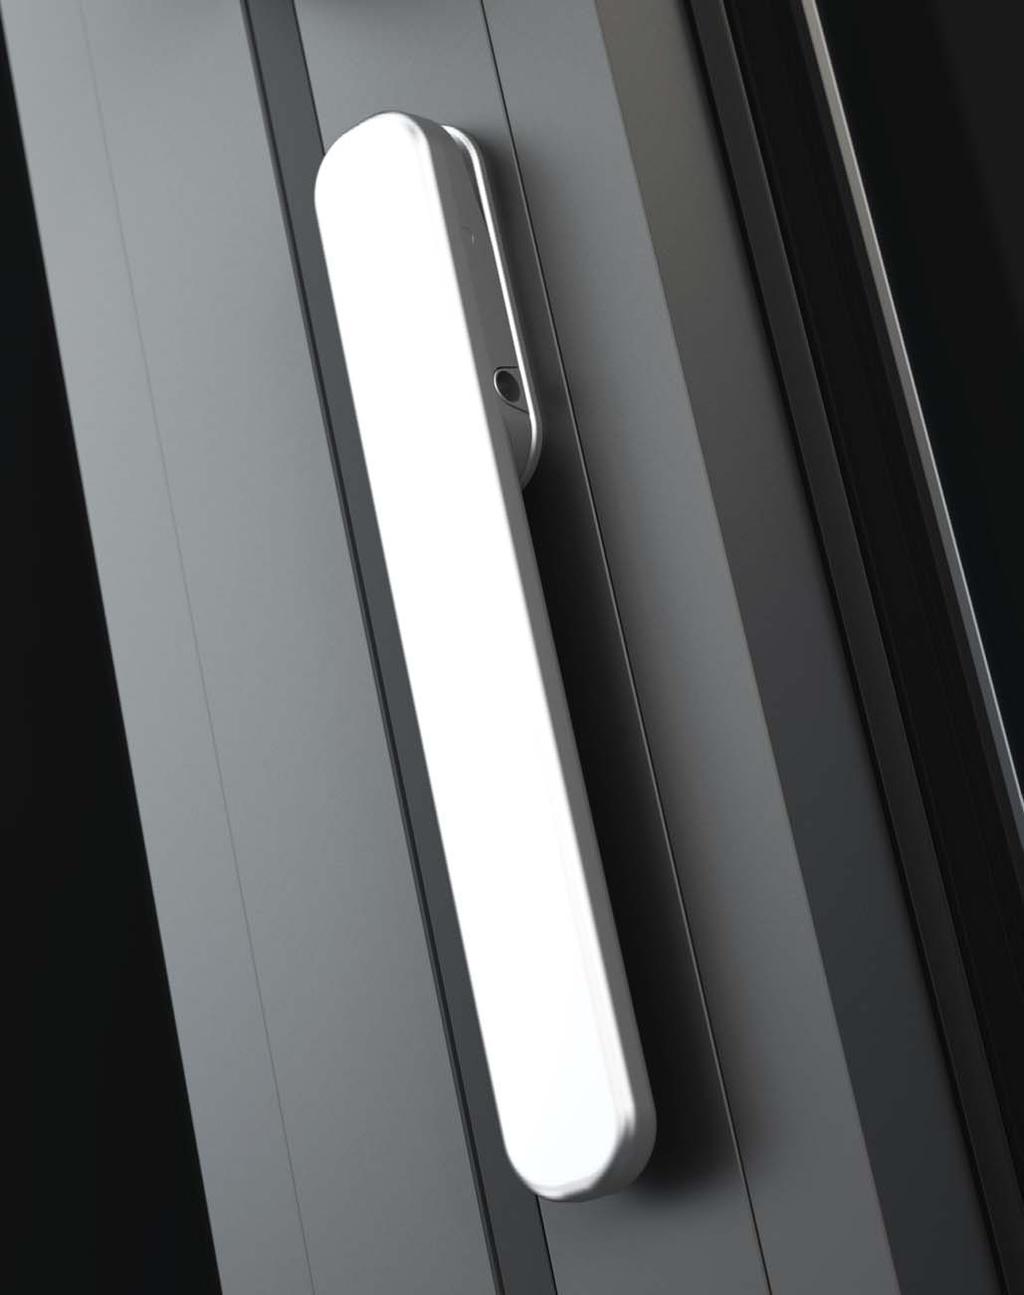 Quality guaranteed The PURe door range uses premium quality materials sourced from reliable suppliers with strong environmental credentials, to produce a structural integrity that outperforms its